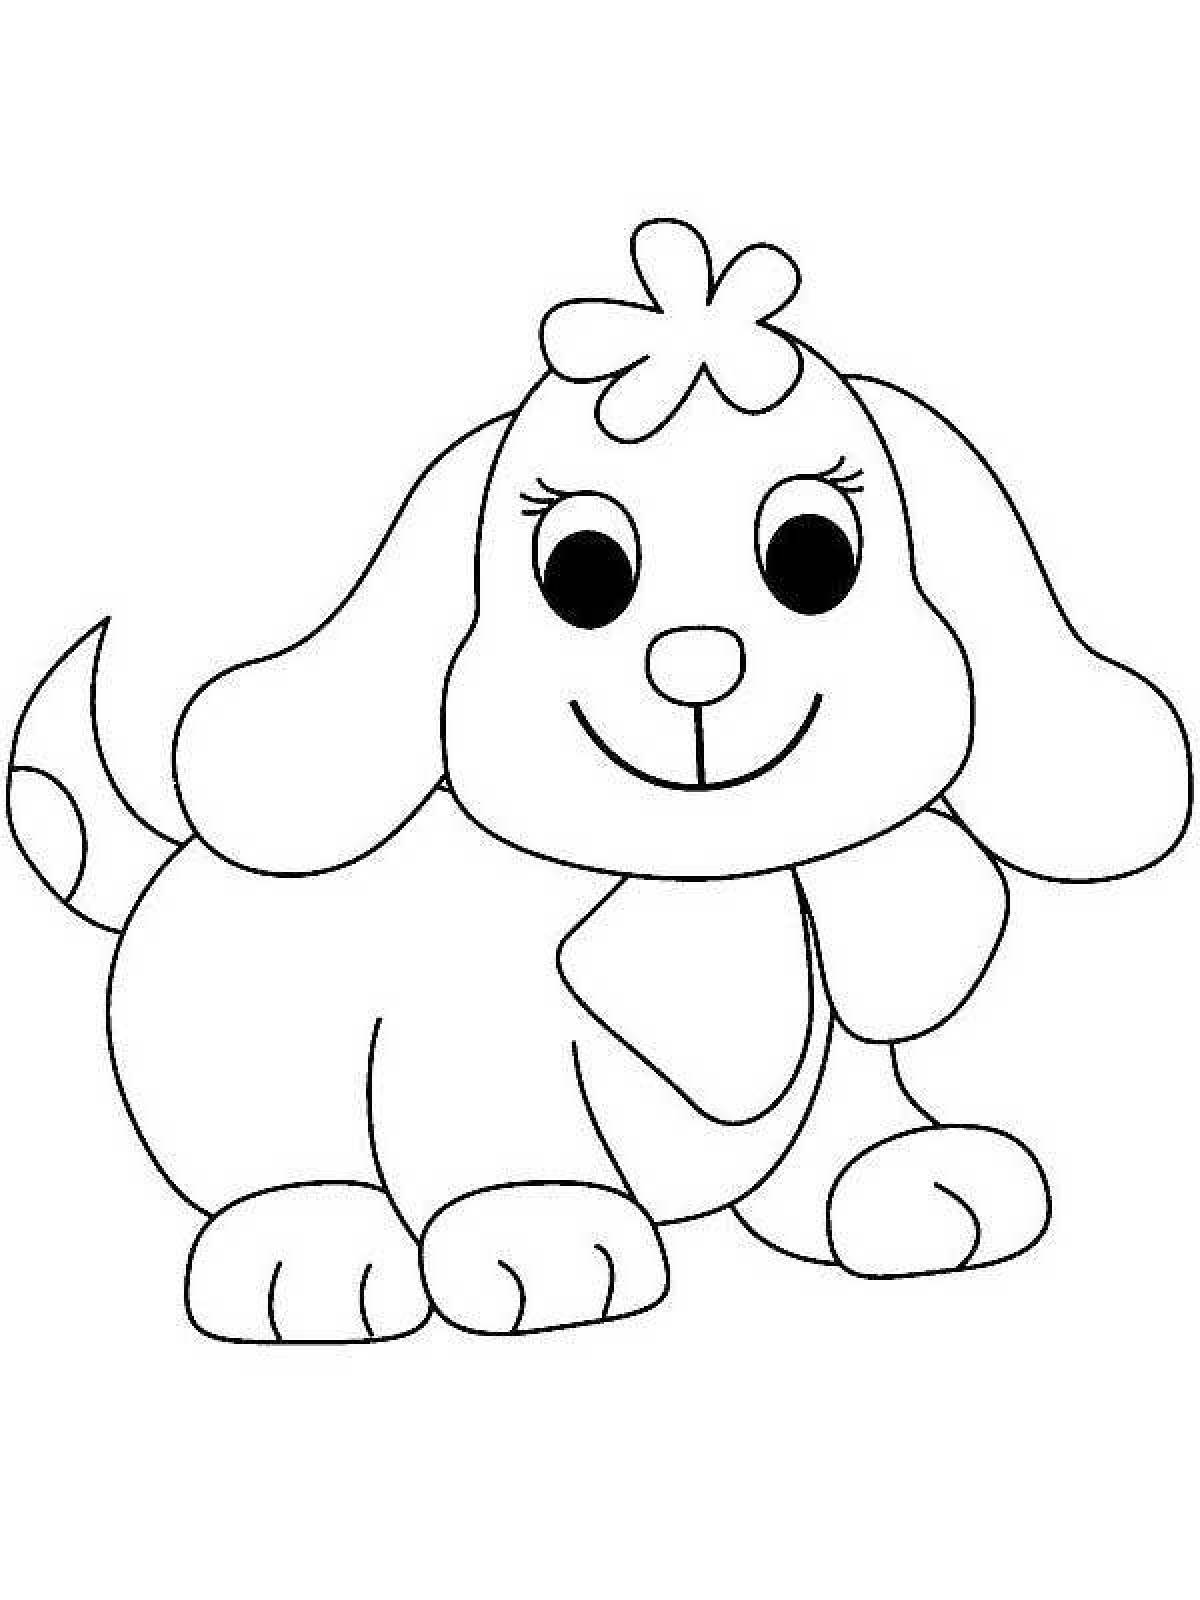 Colourful dog coloring book for children 3-4 years old